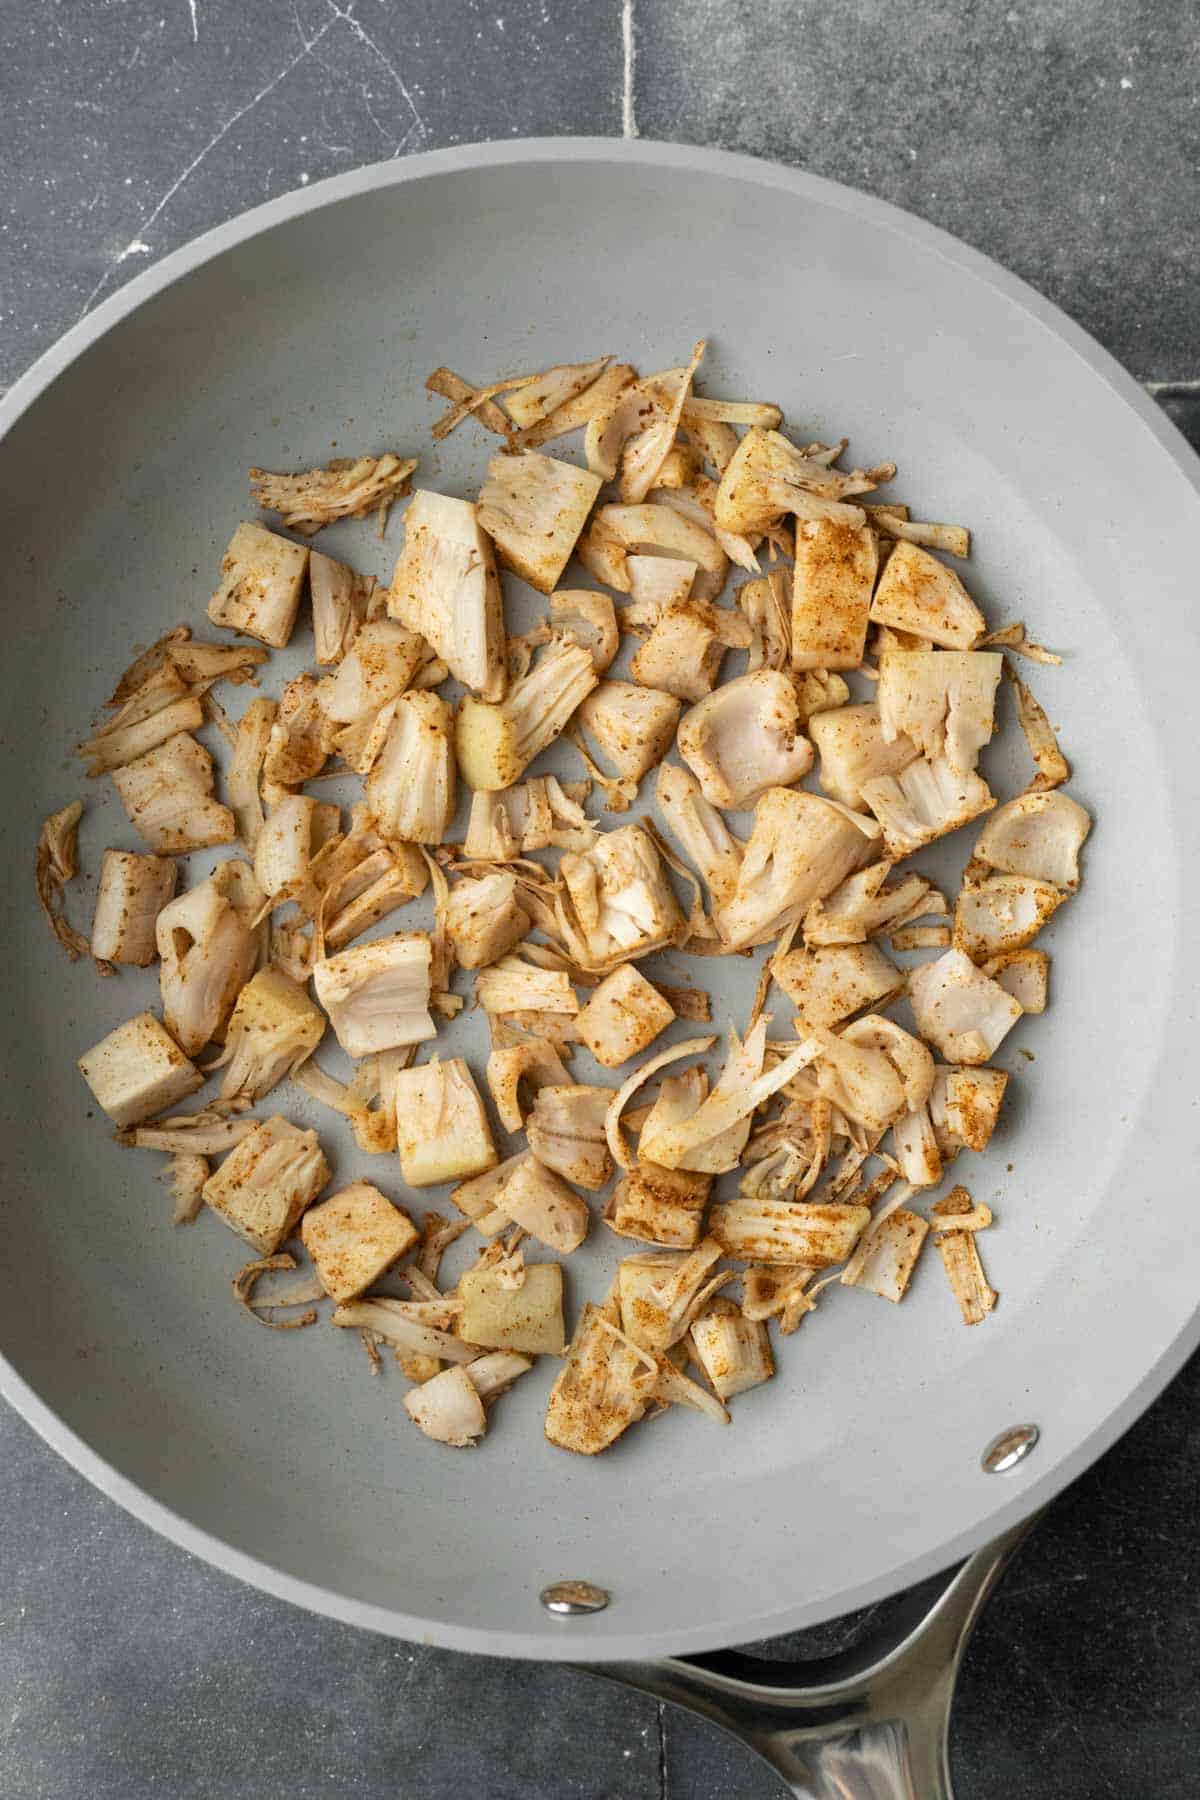 Jackfruit is lightly seasoned with old bay and lemon juice and sauteed to enhance the flavors.